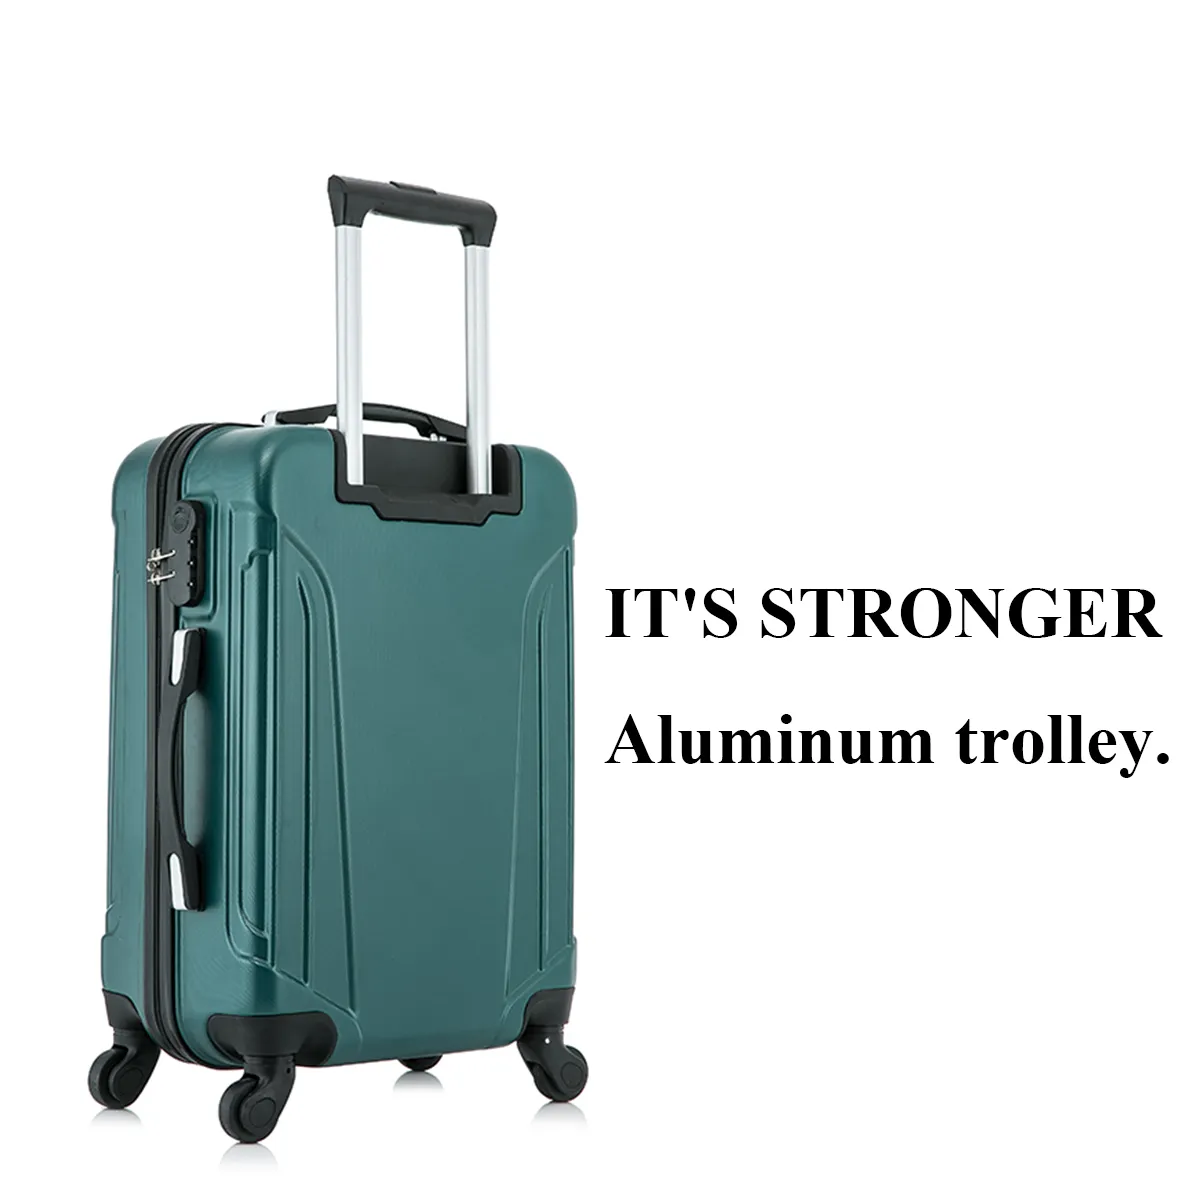 HIGH QUALITY UNISEX BUSINESS TRIP ABS TROLLEY SUITCASE LUGGAGE FOR MEN